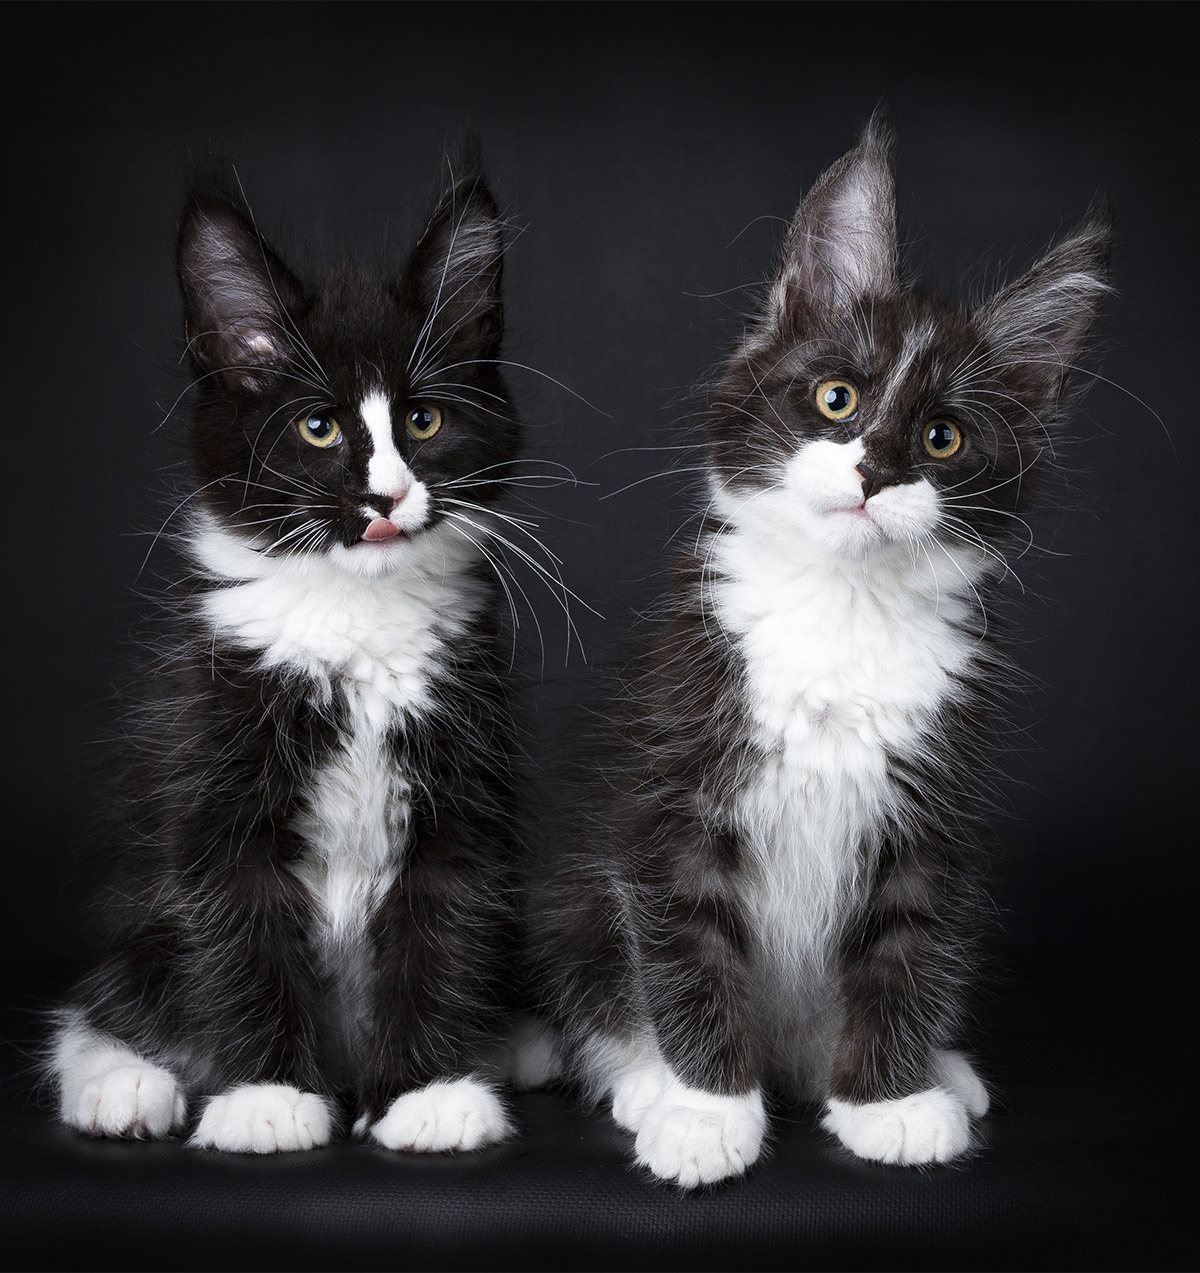 Black And White Maine Coon » Technicalmirchi